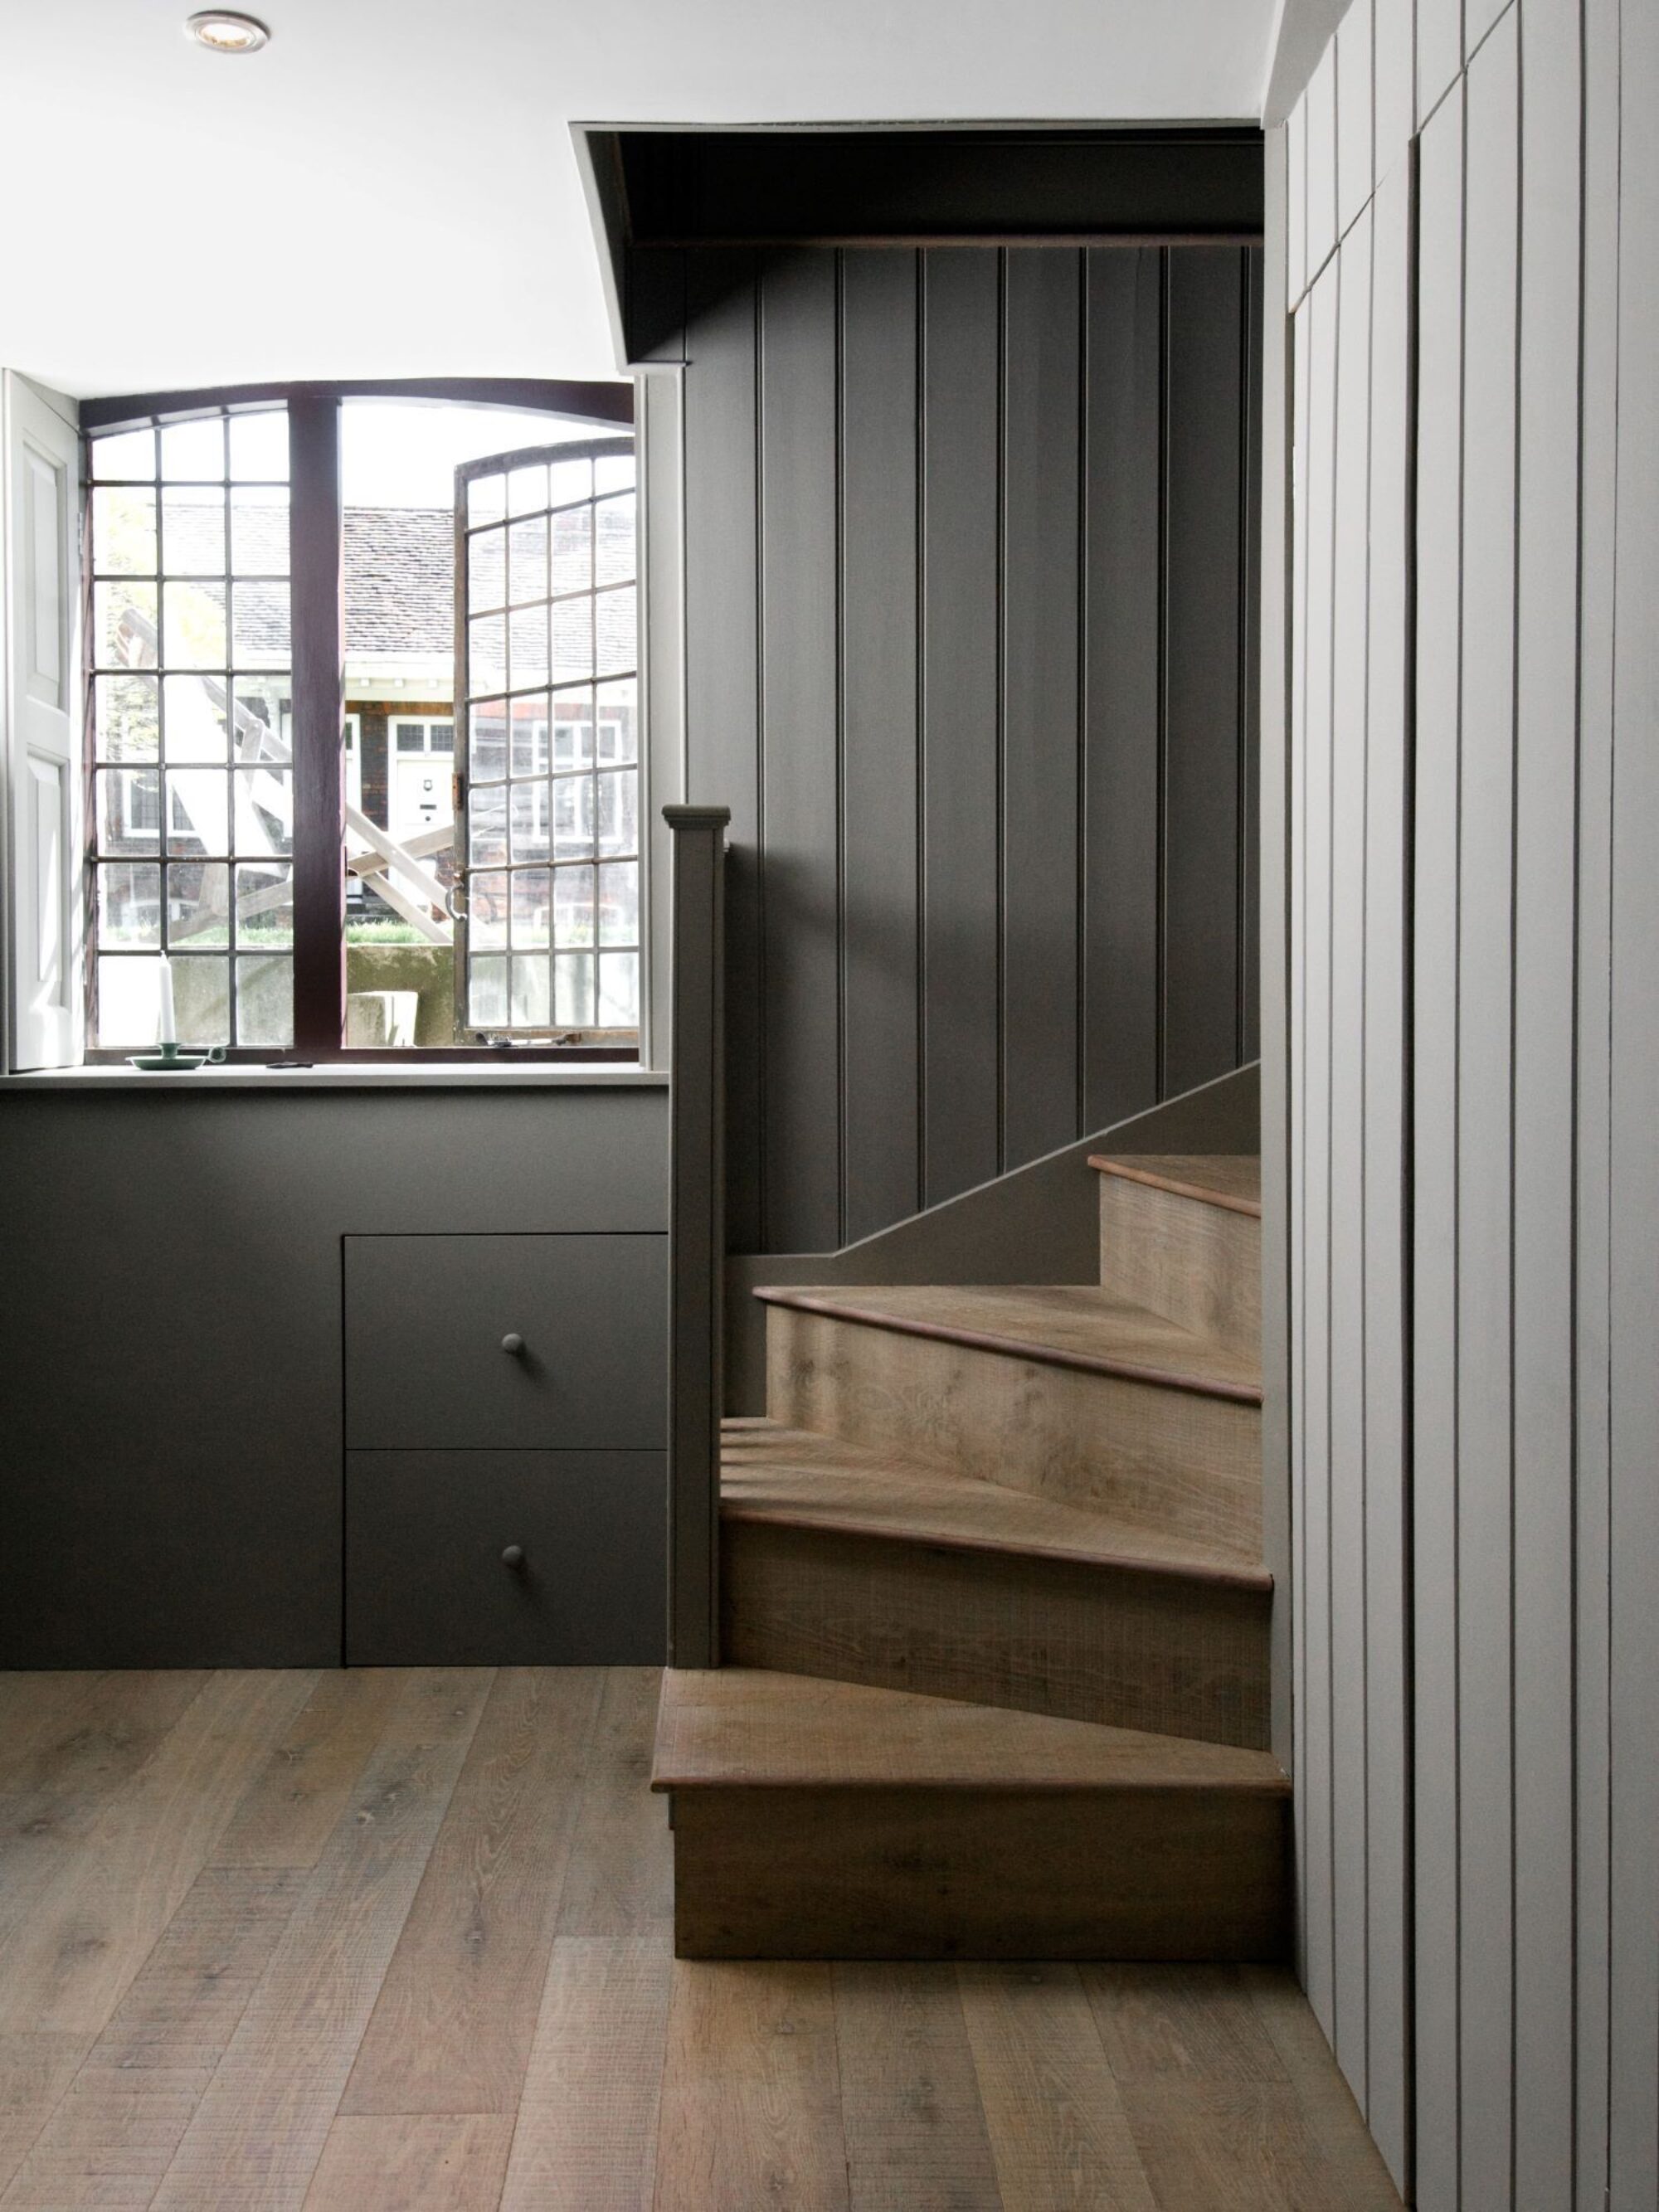 Tate bute flooring with timberclad staircase and grey paneling 1